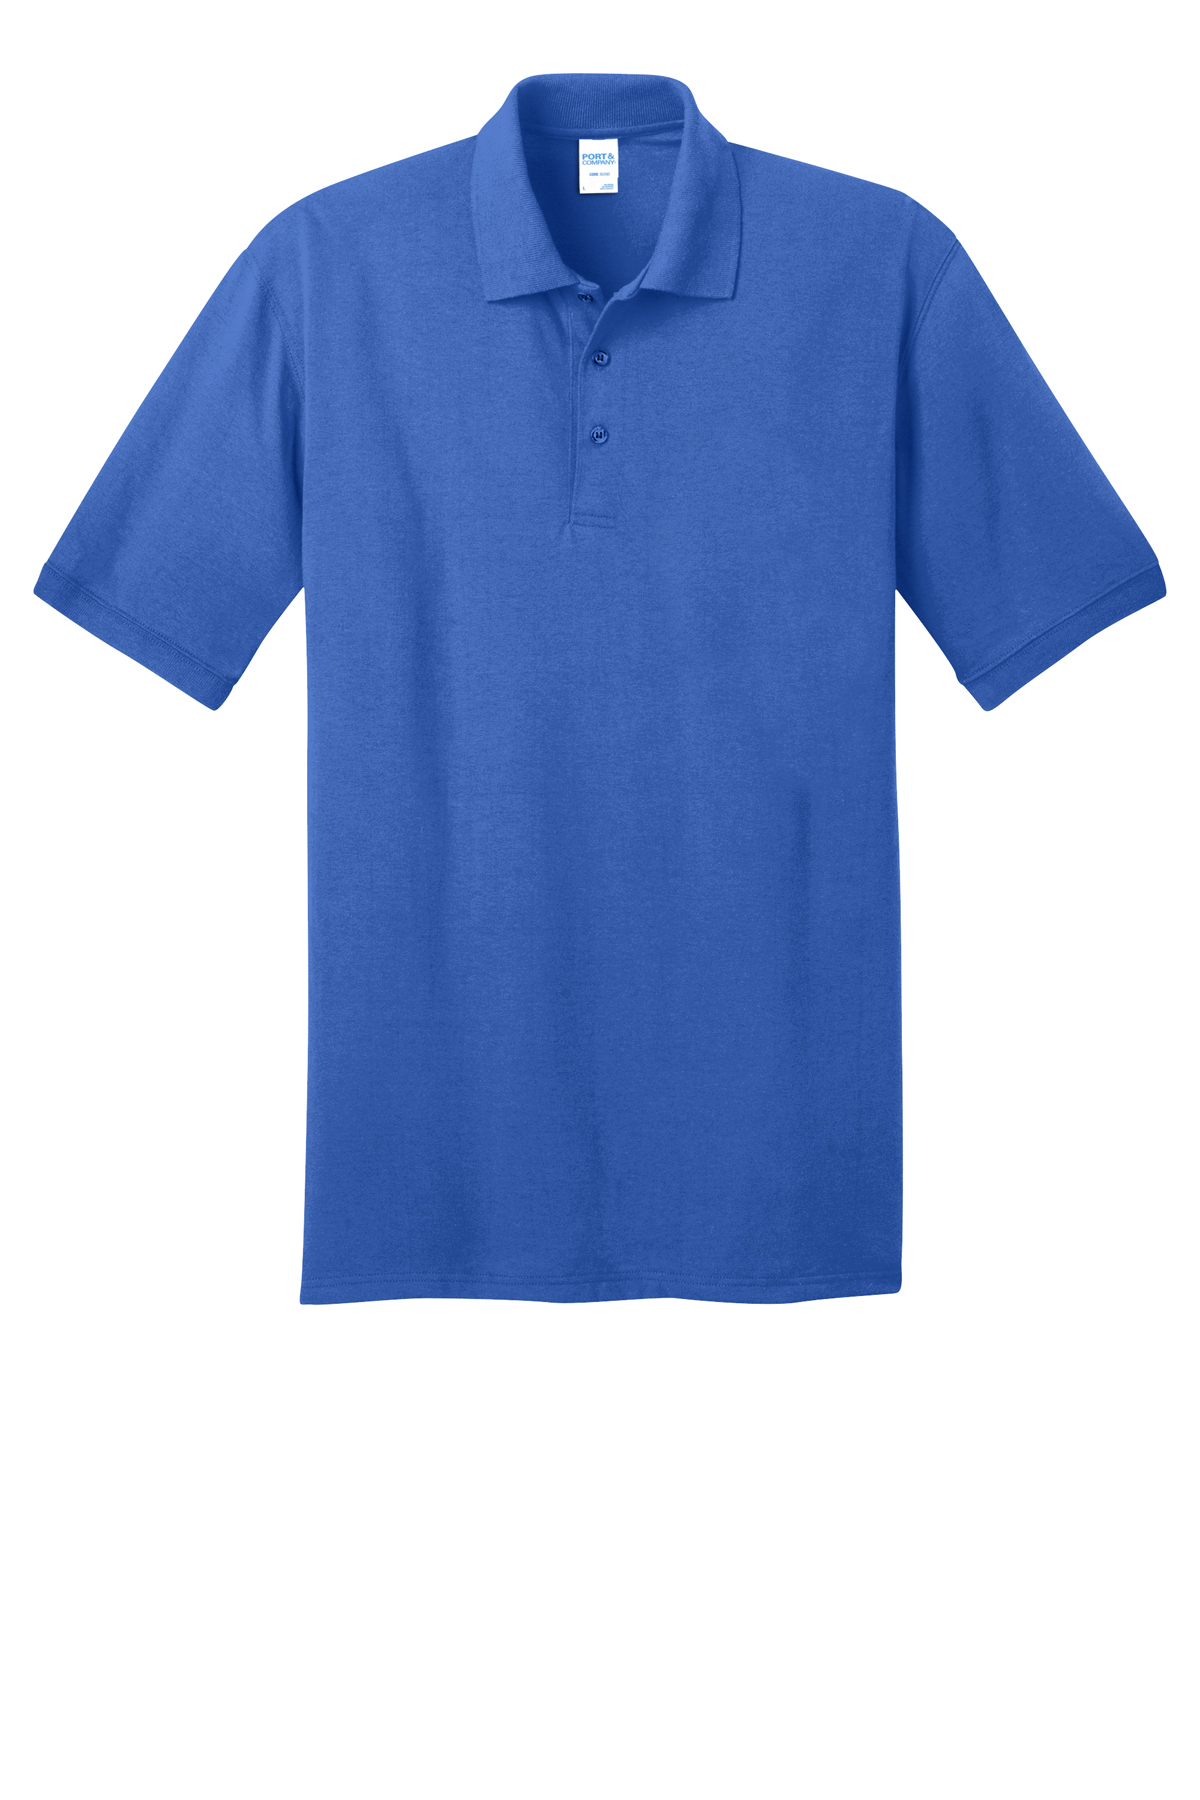 Port & Company Tall Core Blend Jersey Knit Polo | Product | SanMar